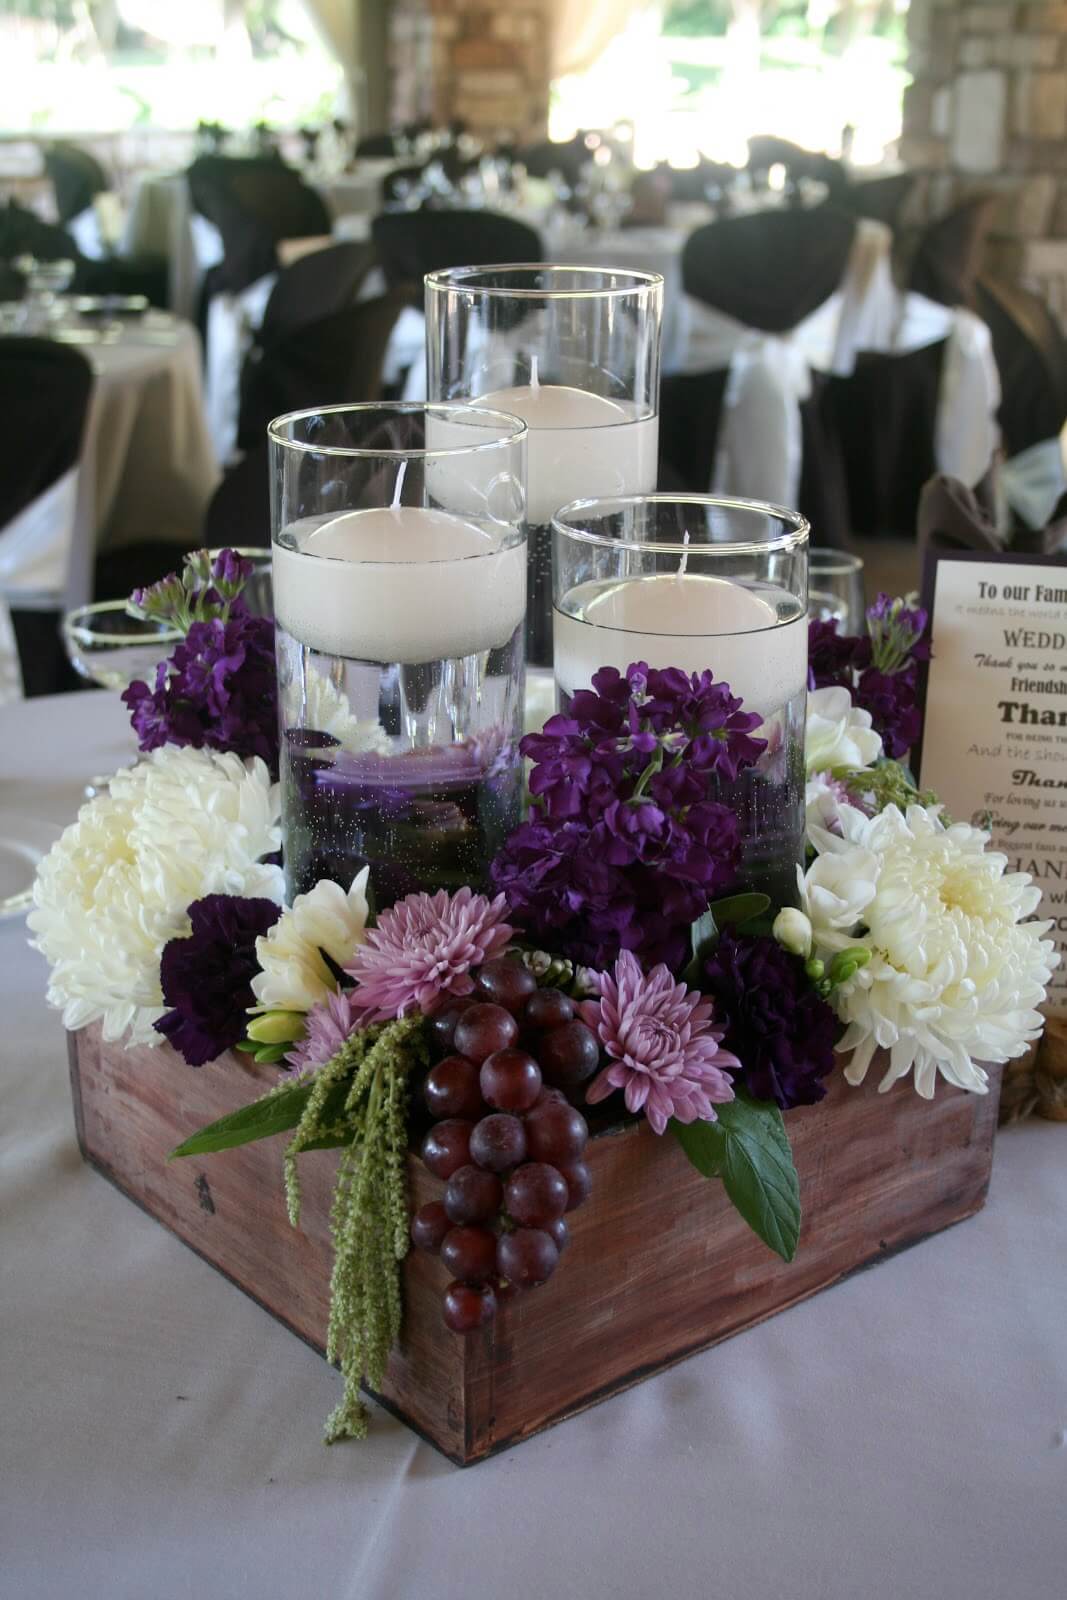 37 Stylish Country Wedding Table Decorations | Table ...